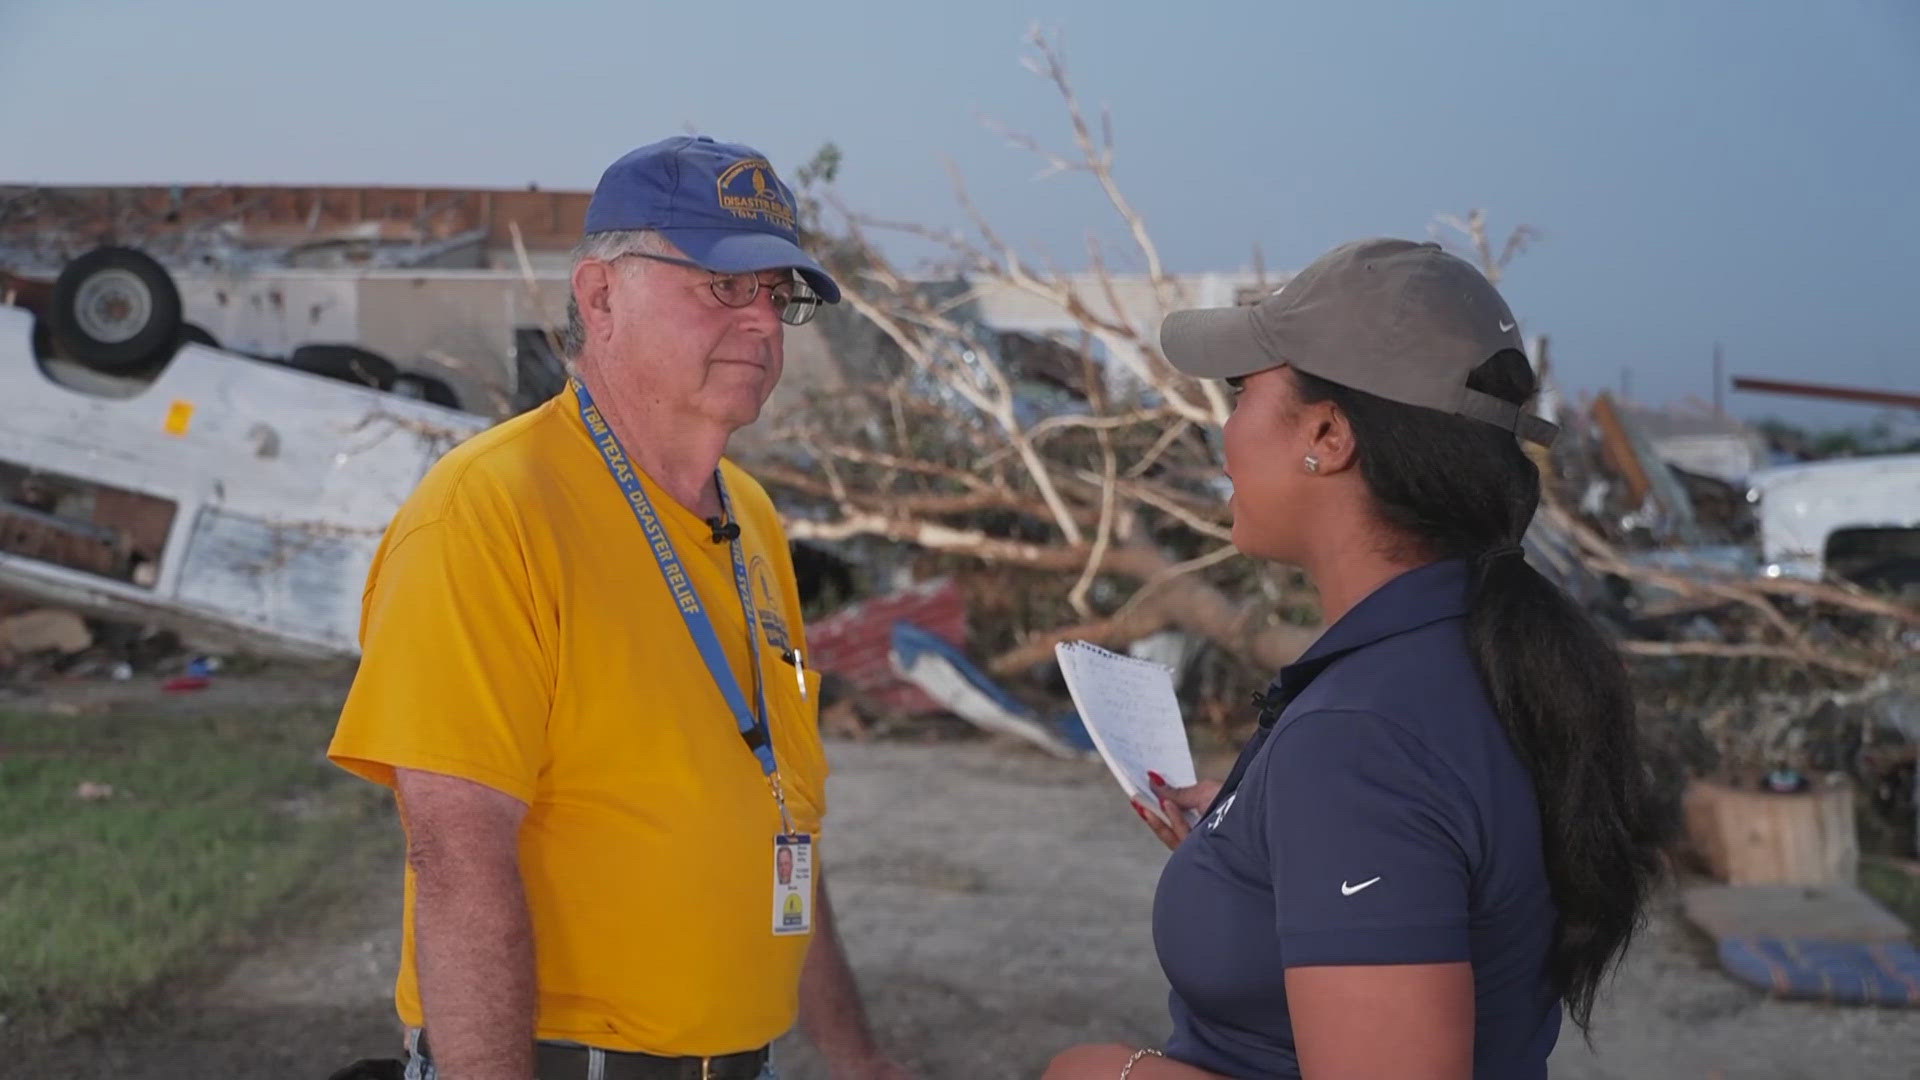 Nonprofits are on site clearing debris to help families recover from the storm.